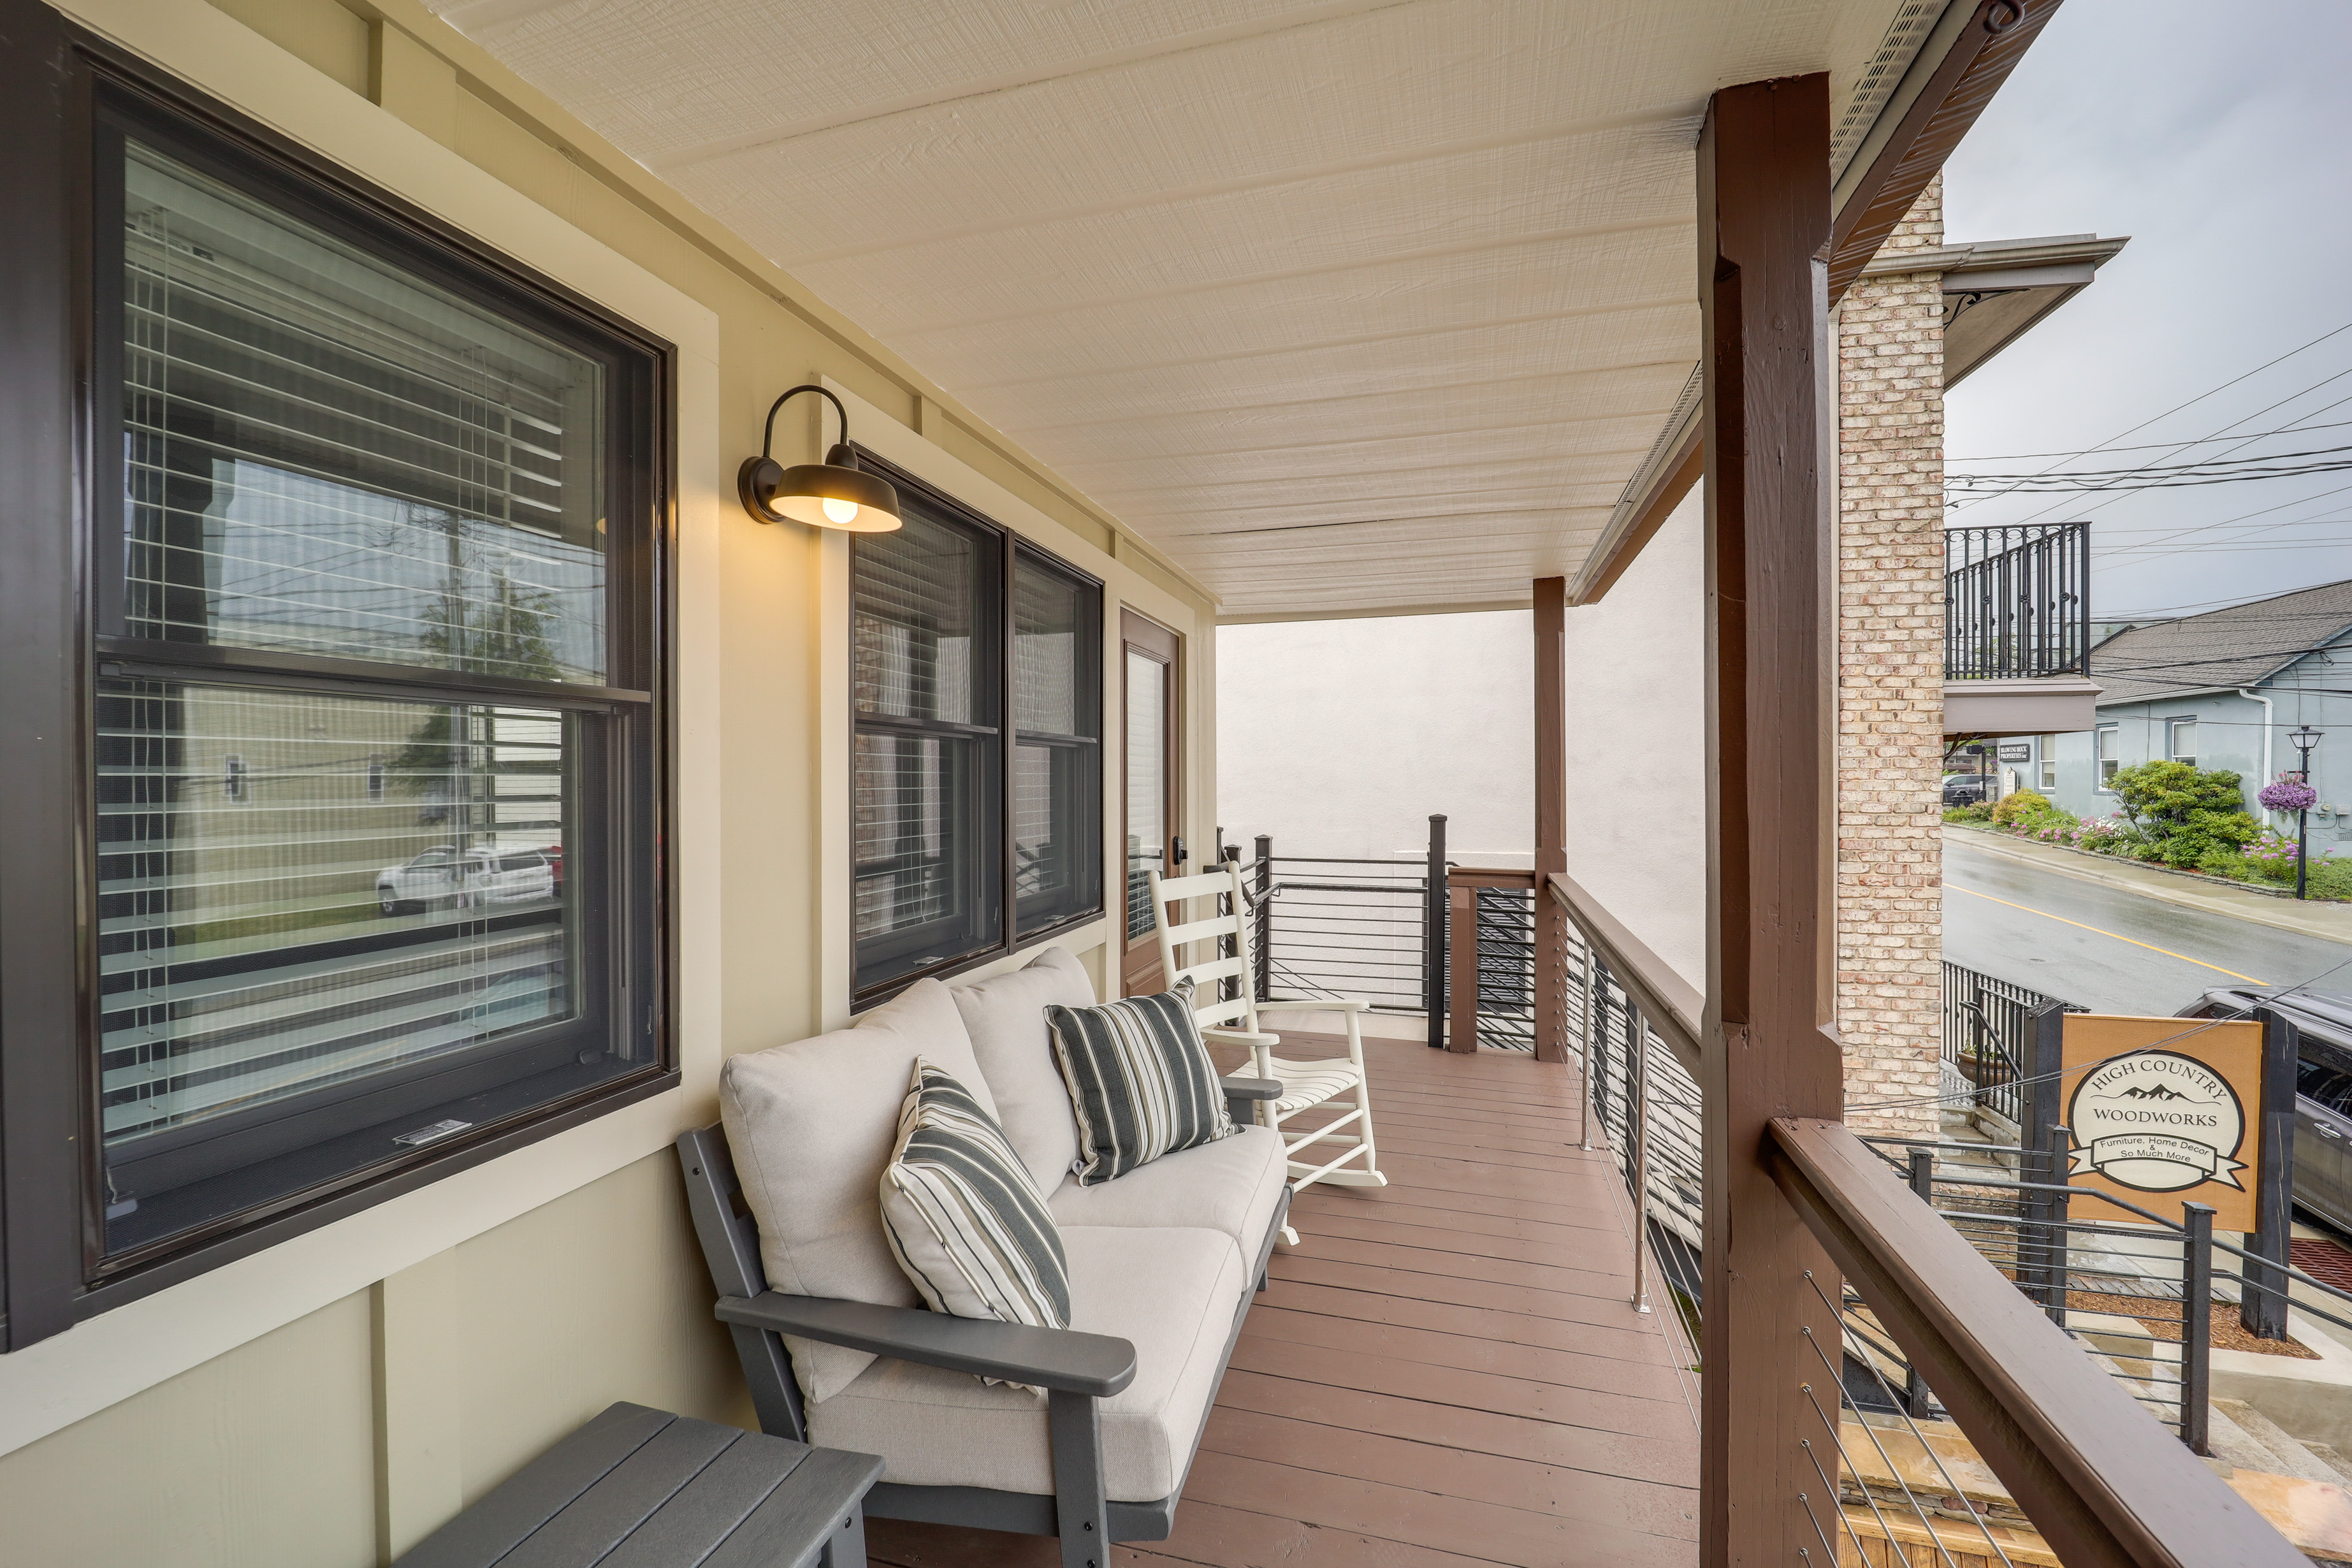 Property Image 2 - Blowing Rock Vacation Rental: Walk to Dining!